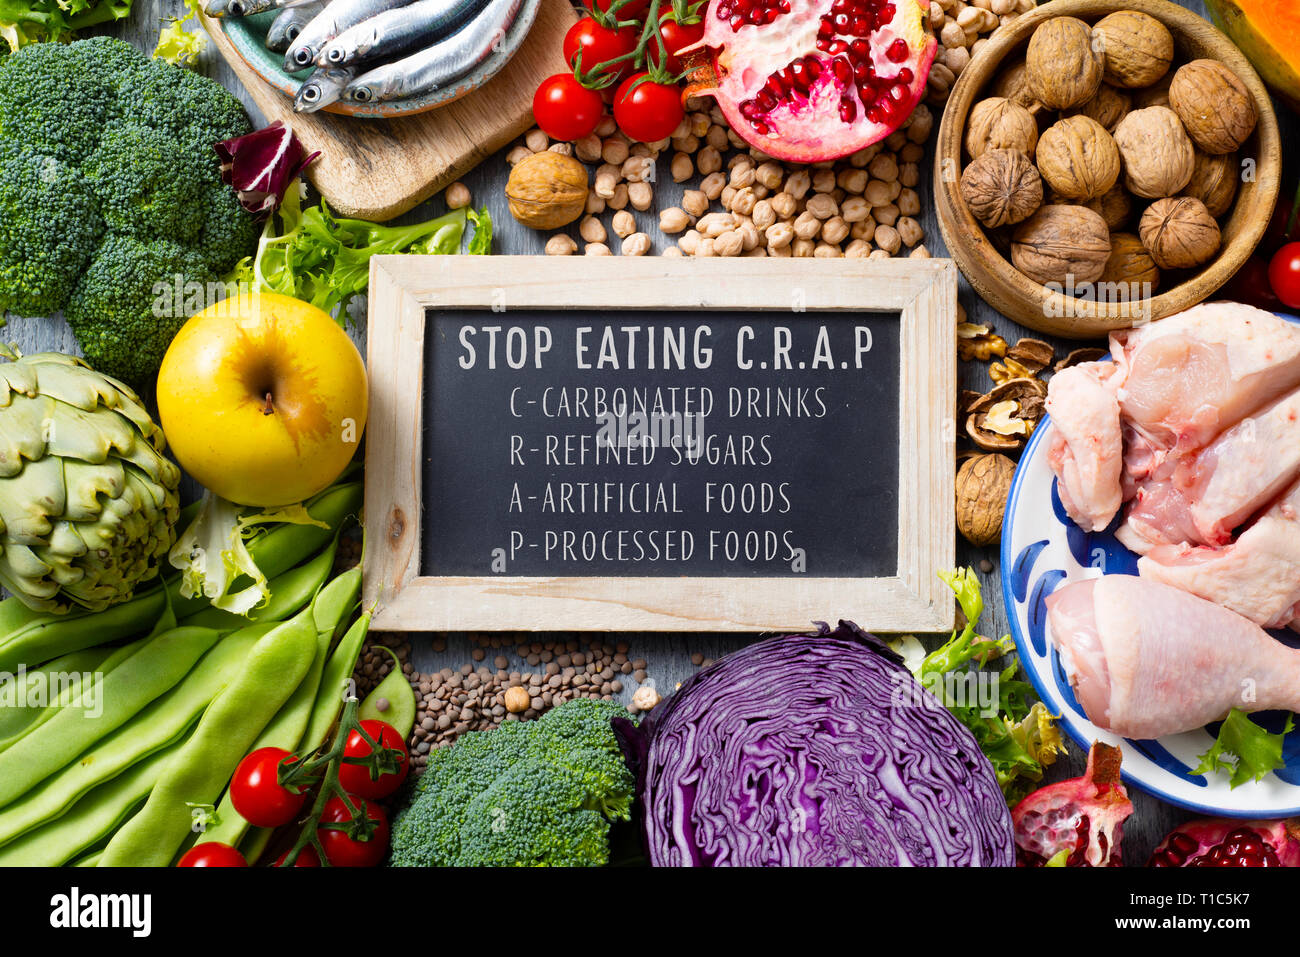 chalkboard with the text stop eating CRAP, for carbonated drinks, refined sugars, artificial foods and processed foods, on a pile of some different ra Stock Photo